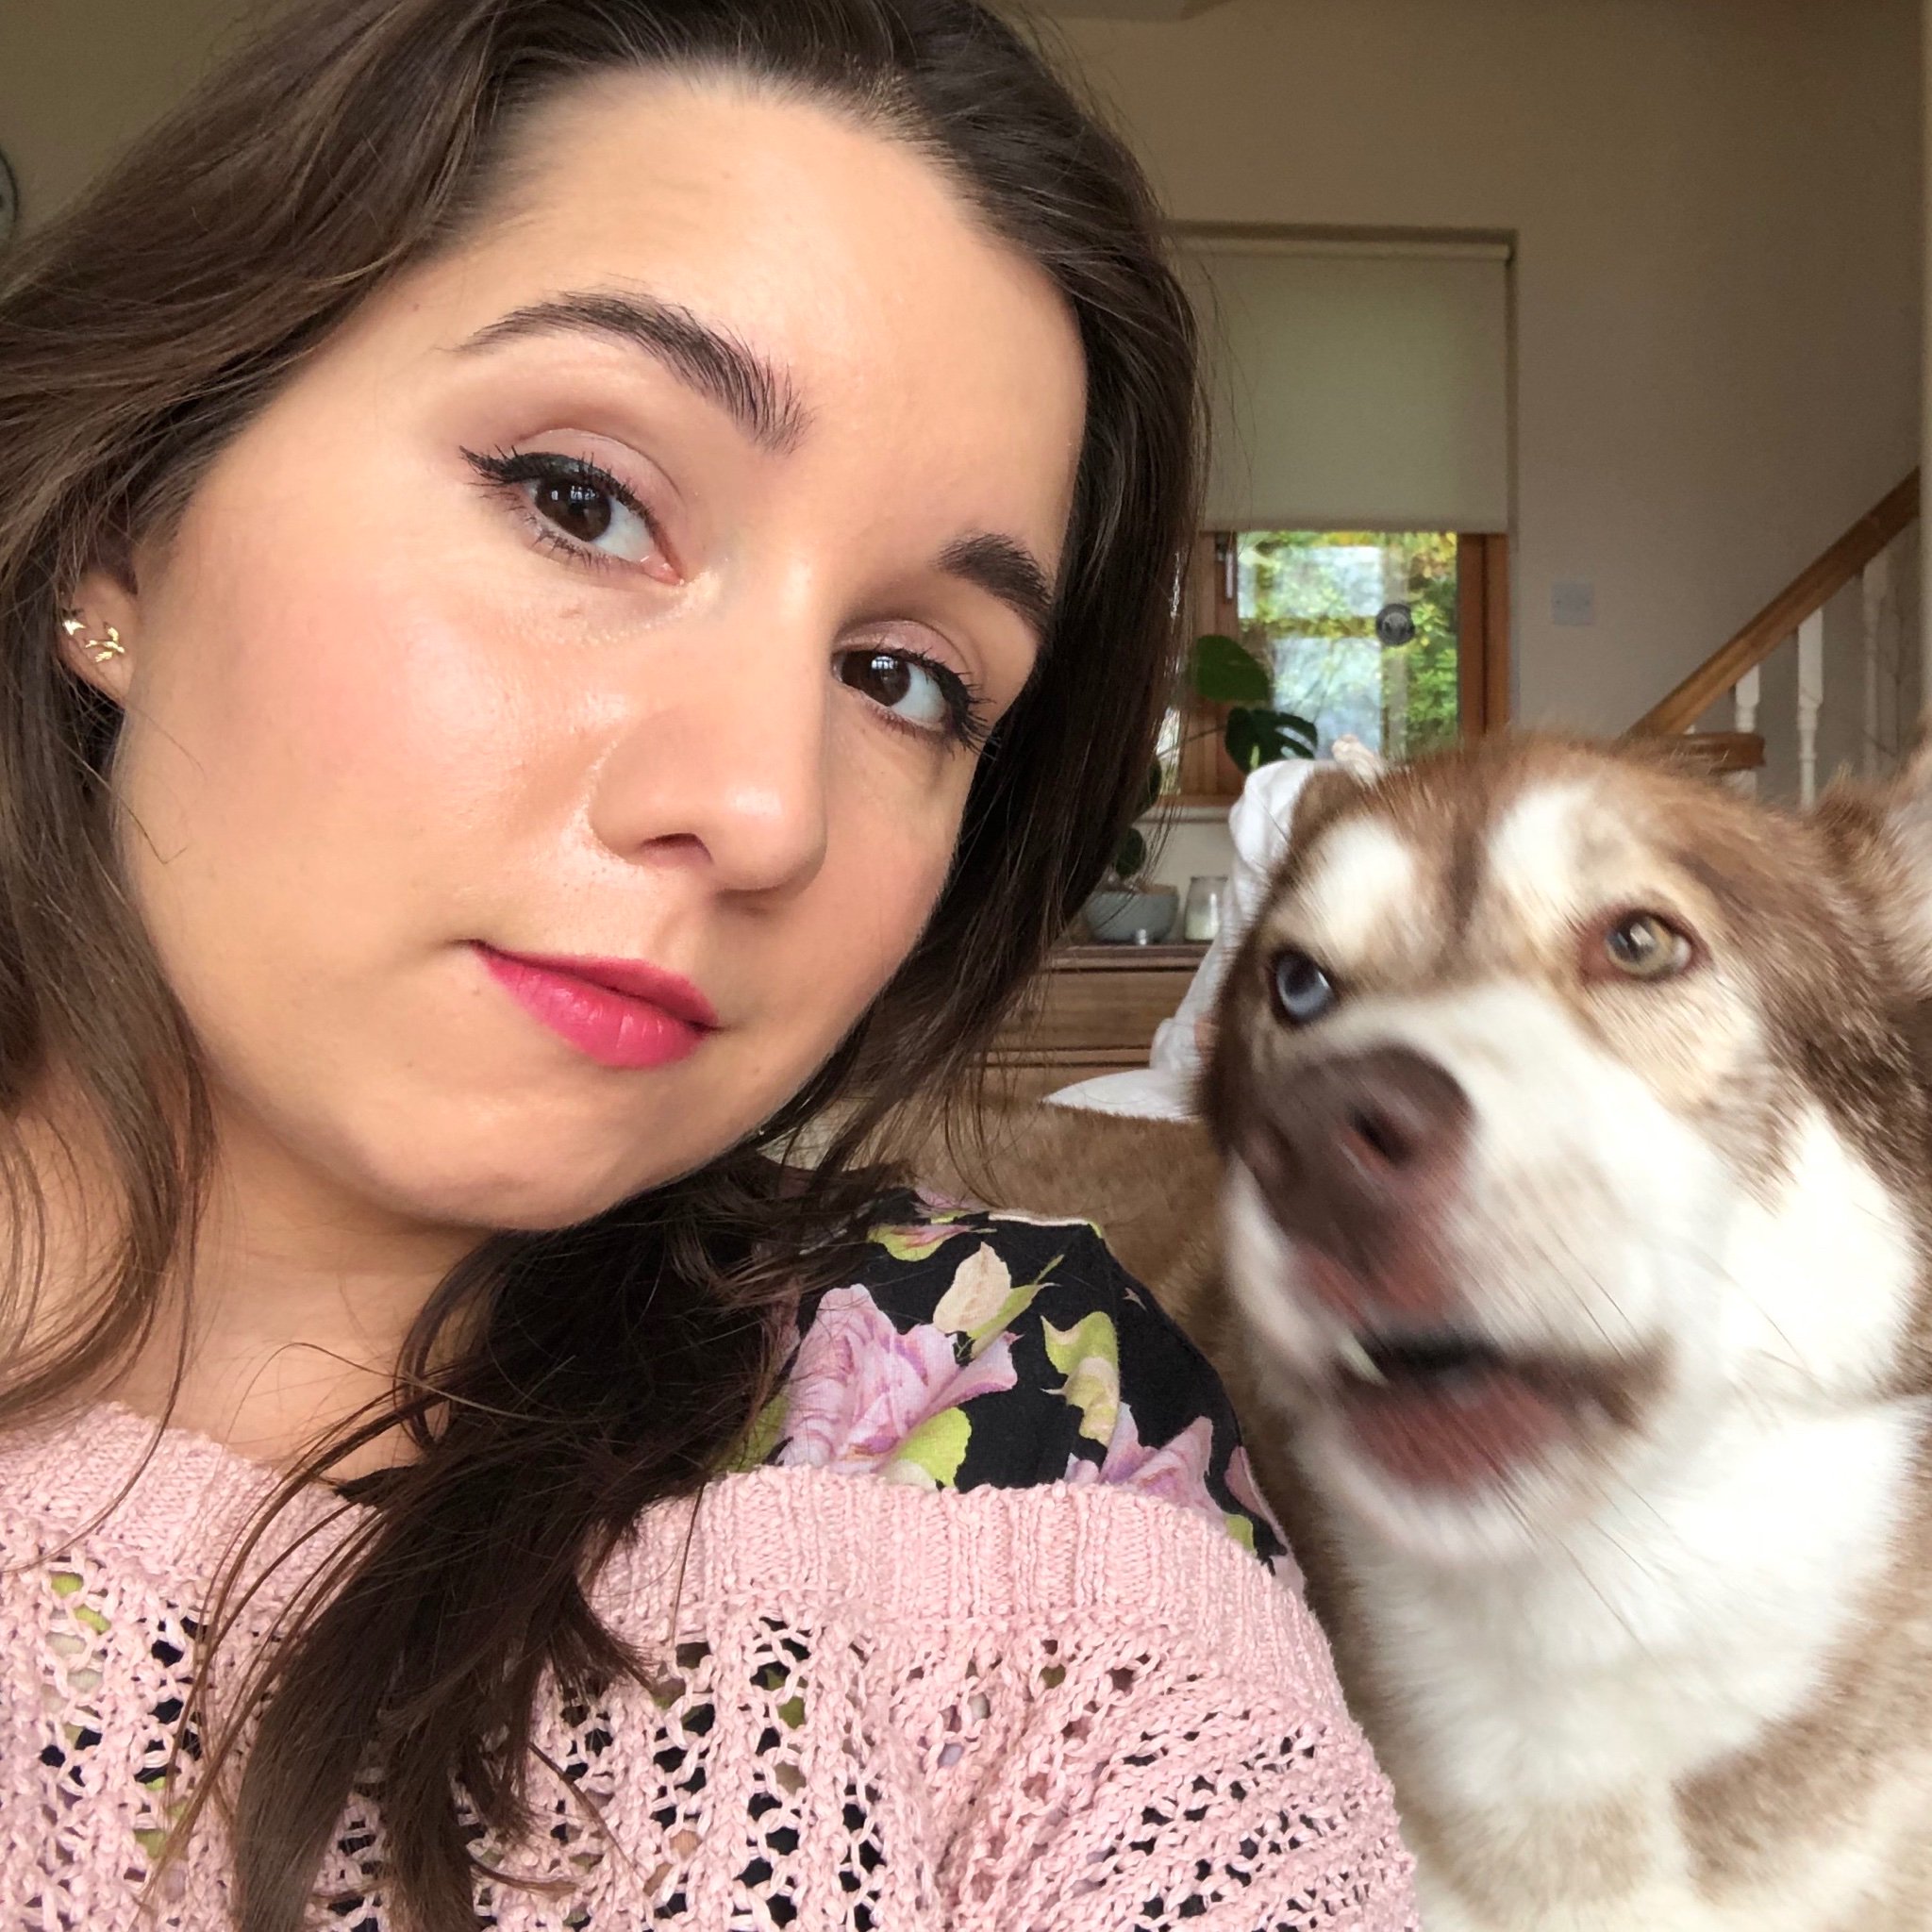 Selfie of me with my dog blurrily appearing over my shoulder to shout in my ear.